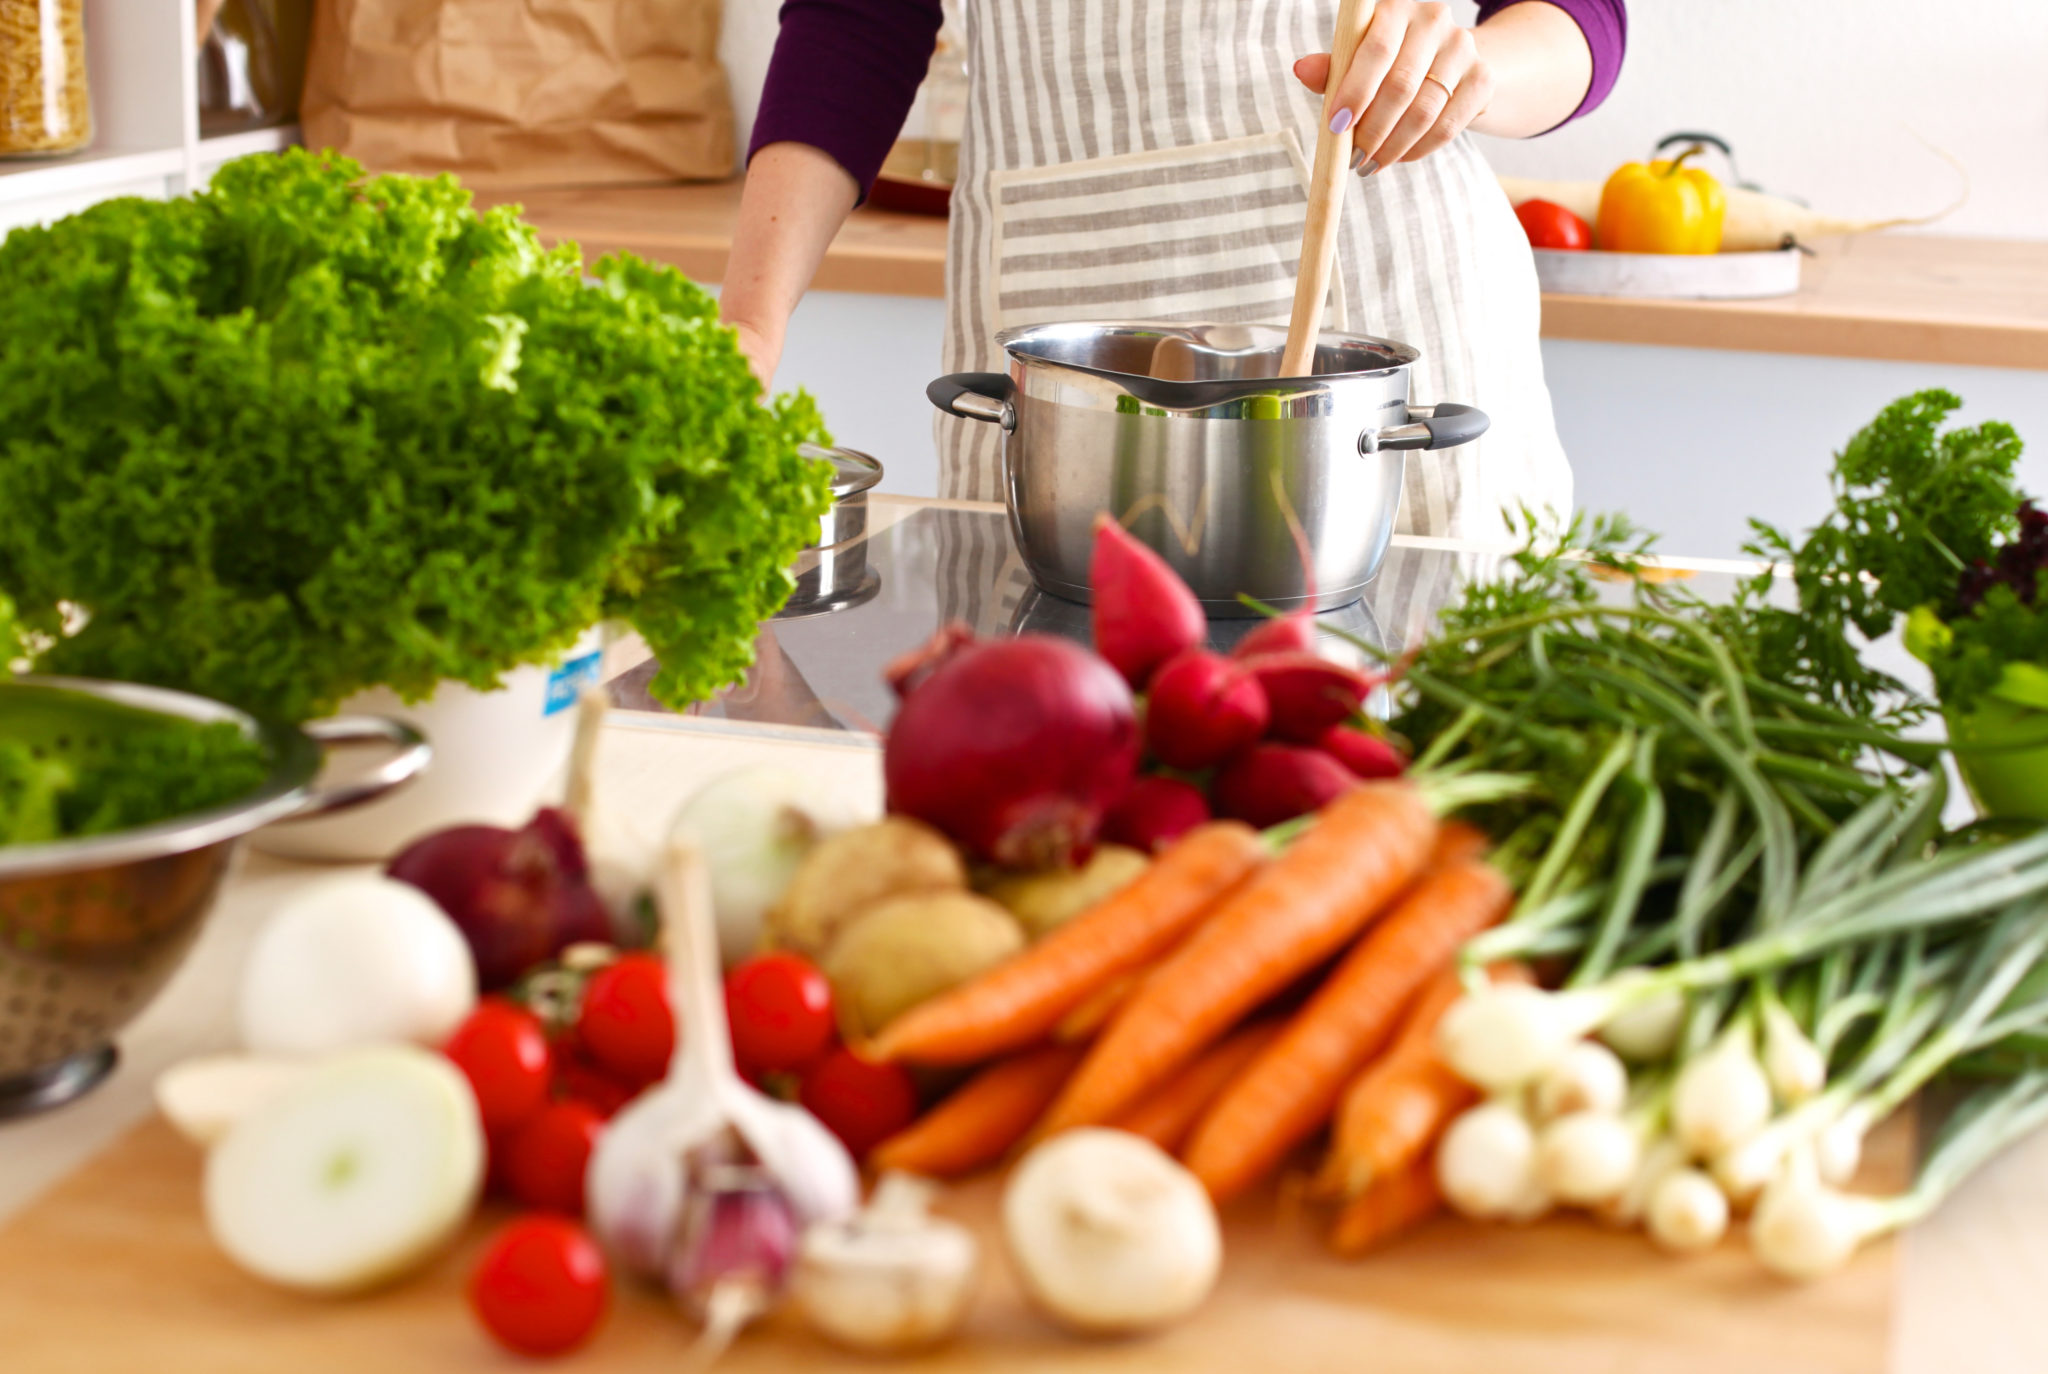 Cook Up a Healthier New Year!